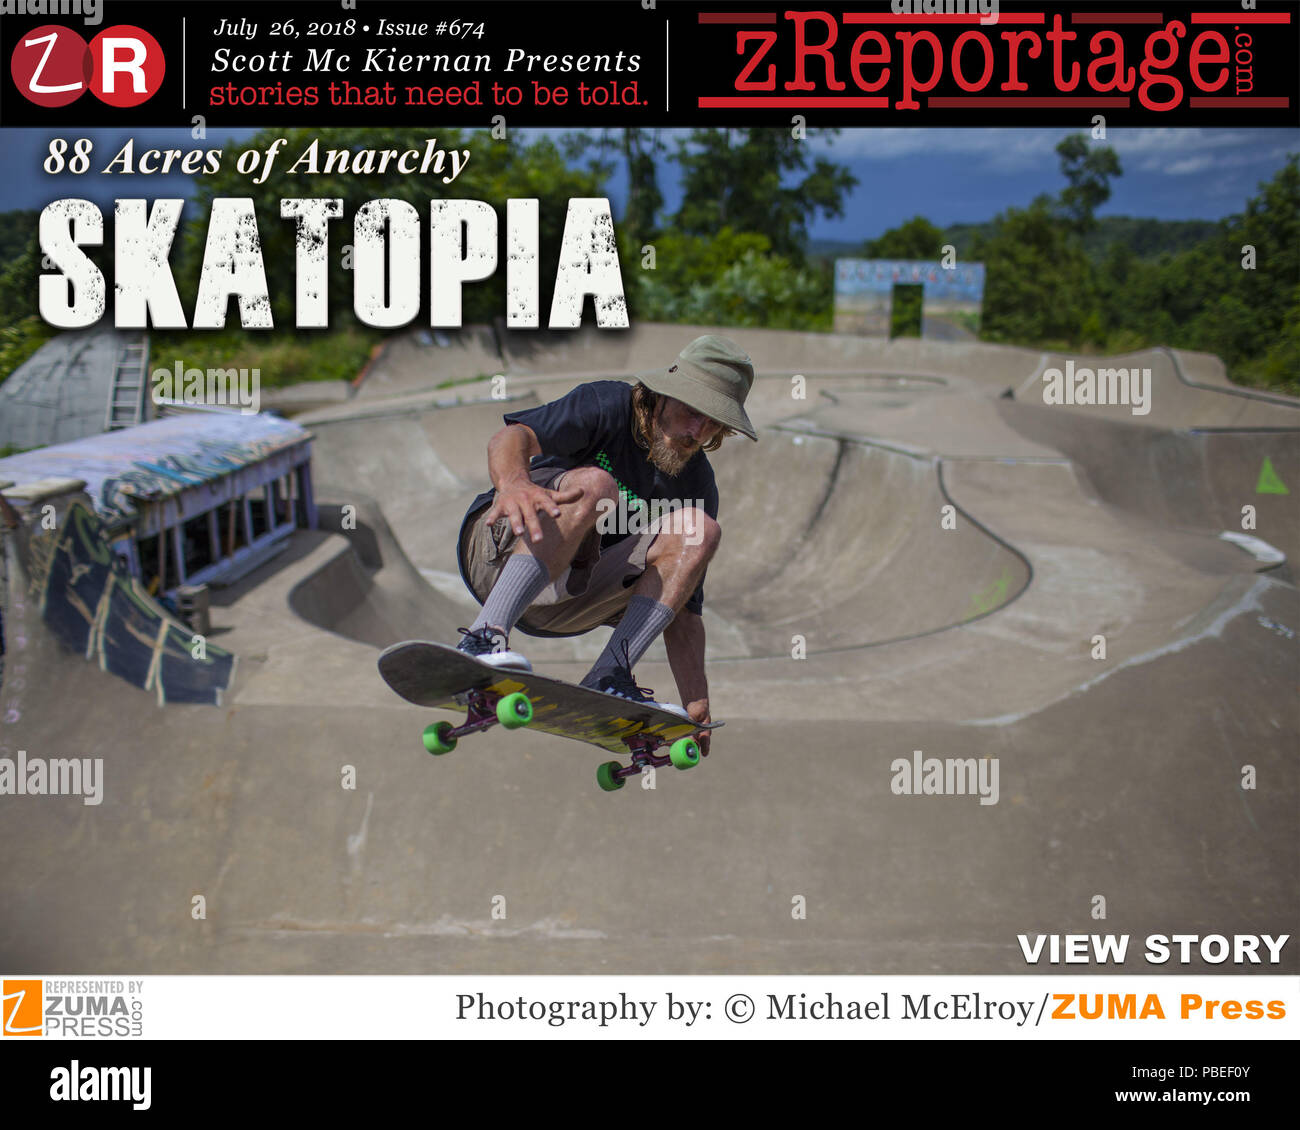 zReportage.com Story of the Week # 674 - SKATOPIA: 88 Acres of Anarchy- Launched July 27, 2018 - Full multimedia experience: audio, stills, text and or video: Go to zReportage.com to see more - Skatopia is an Appalachian farm where hardcore skating, punk rock and hillbilly culture collide. Mad-Max style demolition derbies and spontaneous car burning partners with 24/7 skate sessions. Tony Hawk calls Skatopia a 'rite of passage' for hardcore skaters. Skatopia's owner, Brewce Martin, dreamed of a place where he could live and breathe skating, a place where people forget their 'outside' lives by Stock Photo